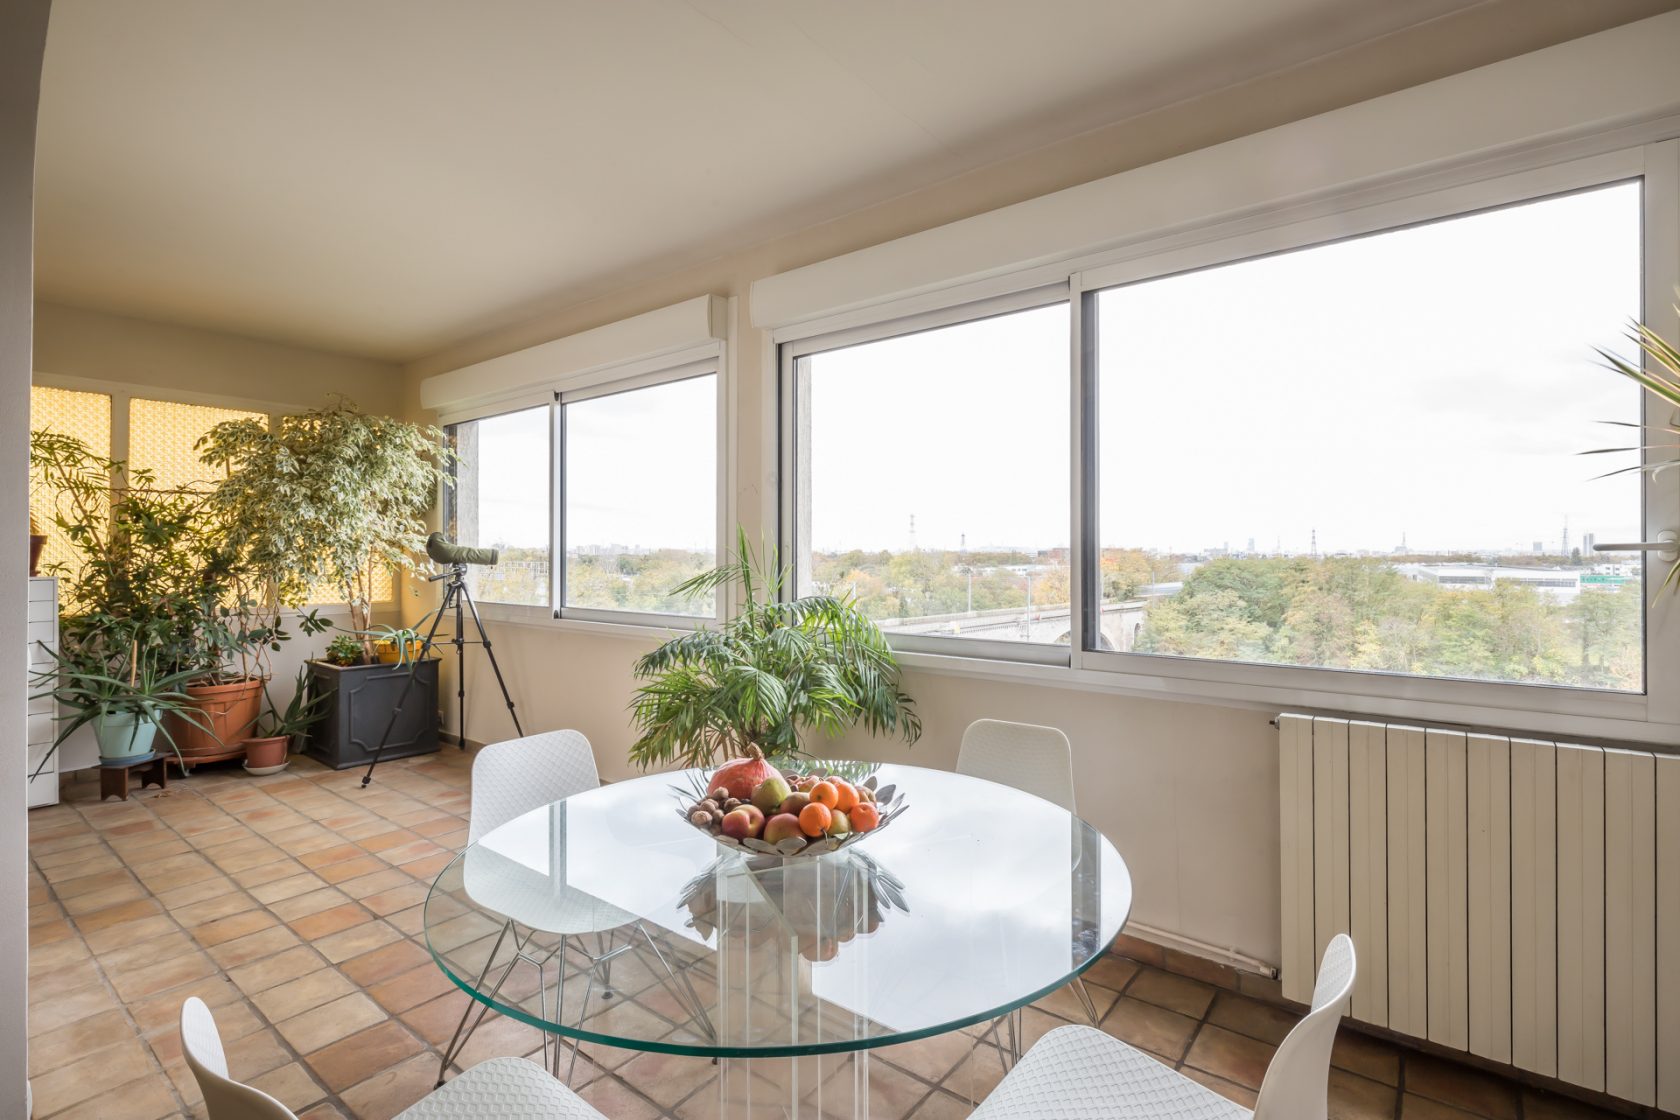 House with panoramic views of the Seine and Paris